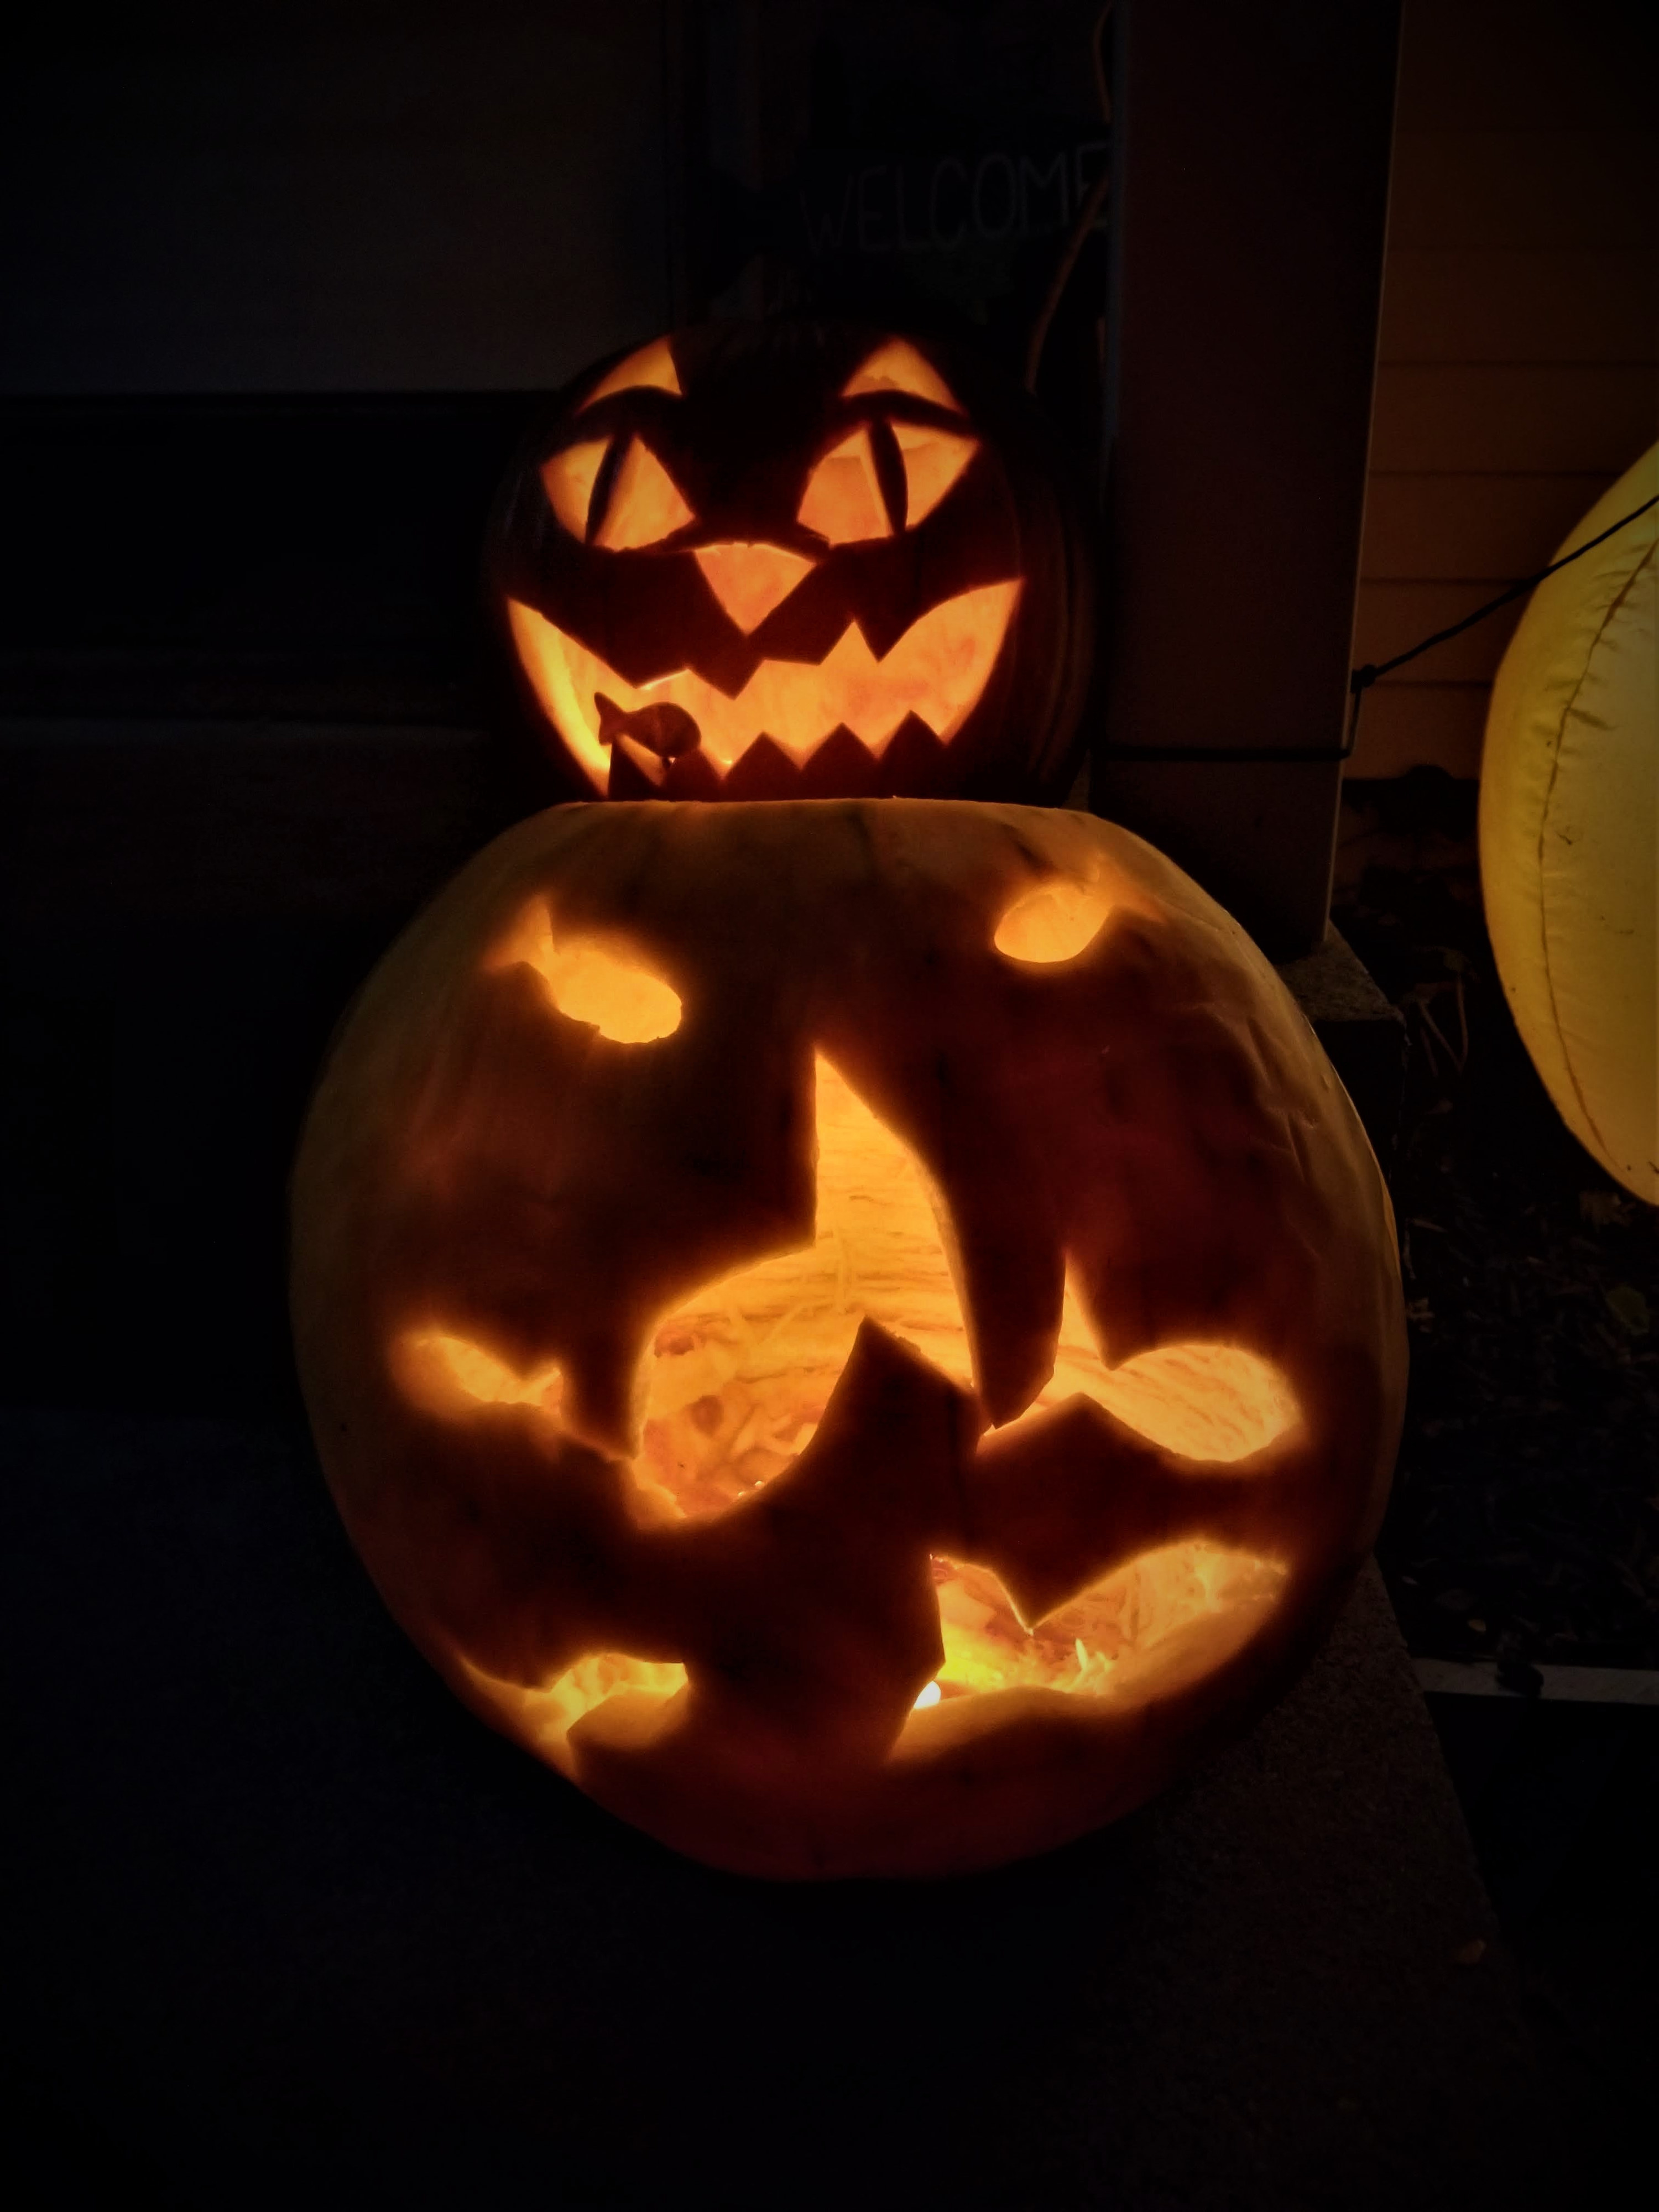 Hand carved pumpkin of a cat eating a fish and a fishbowl